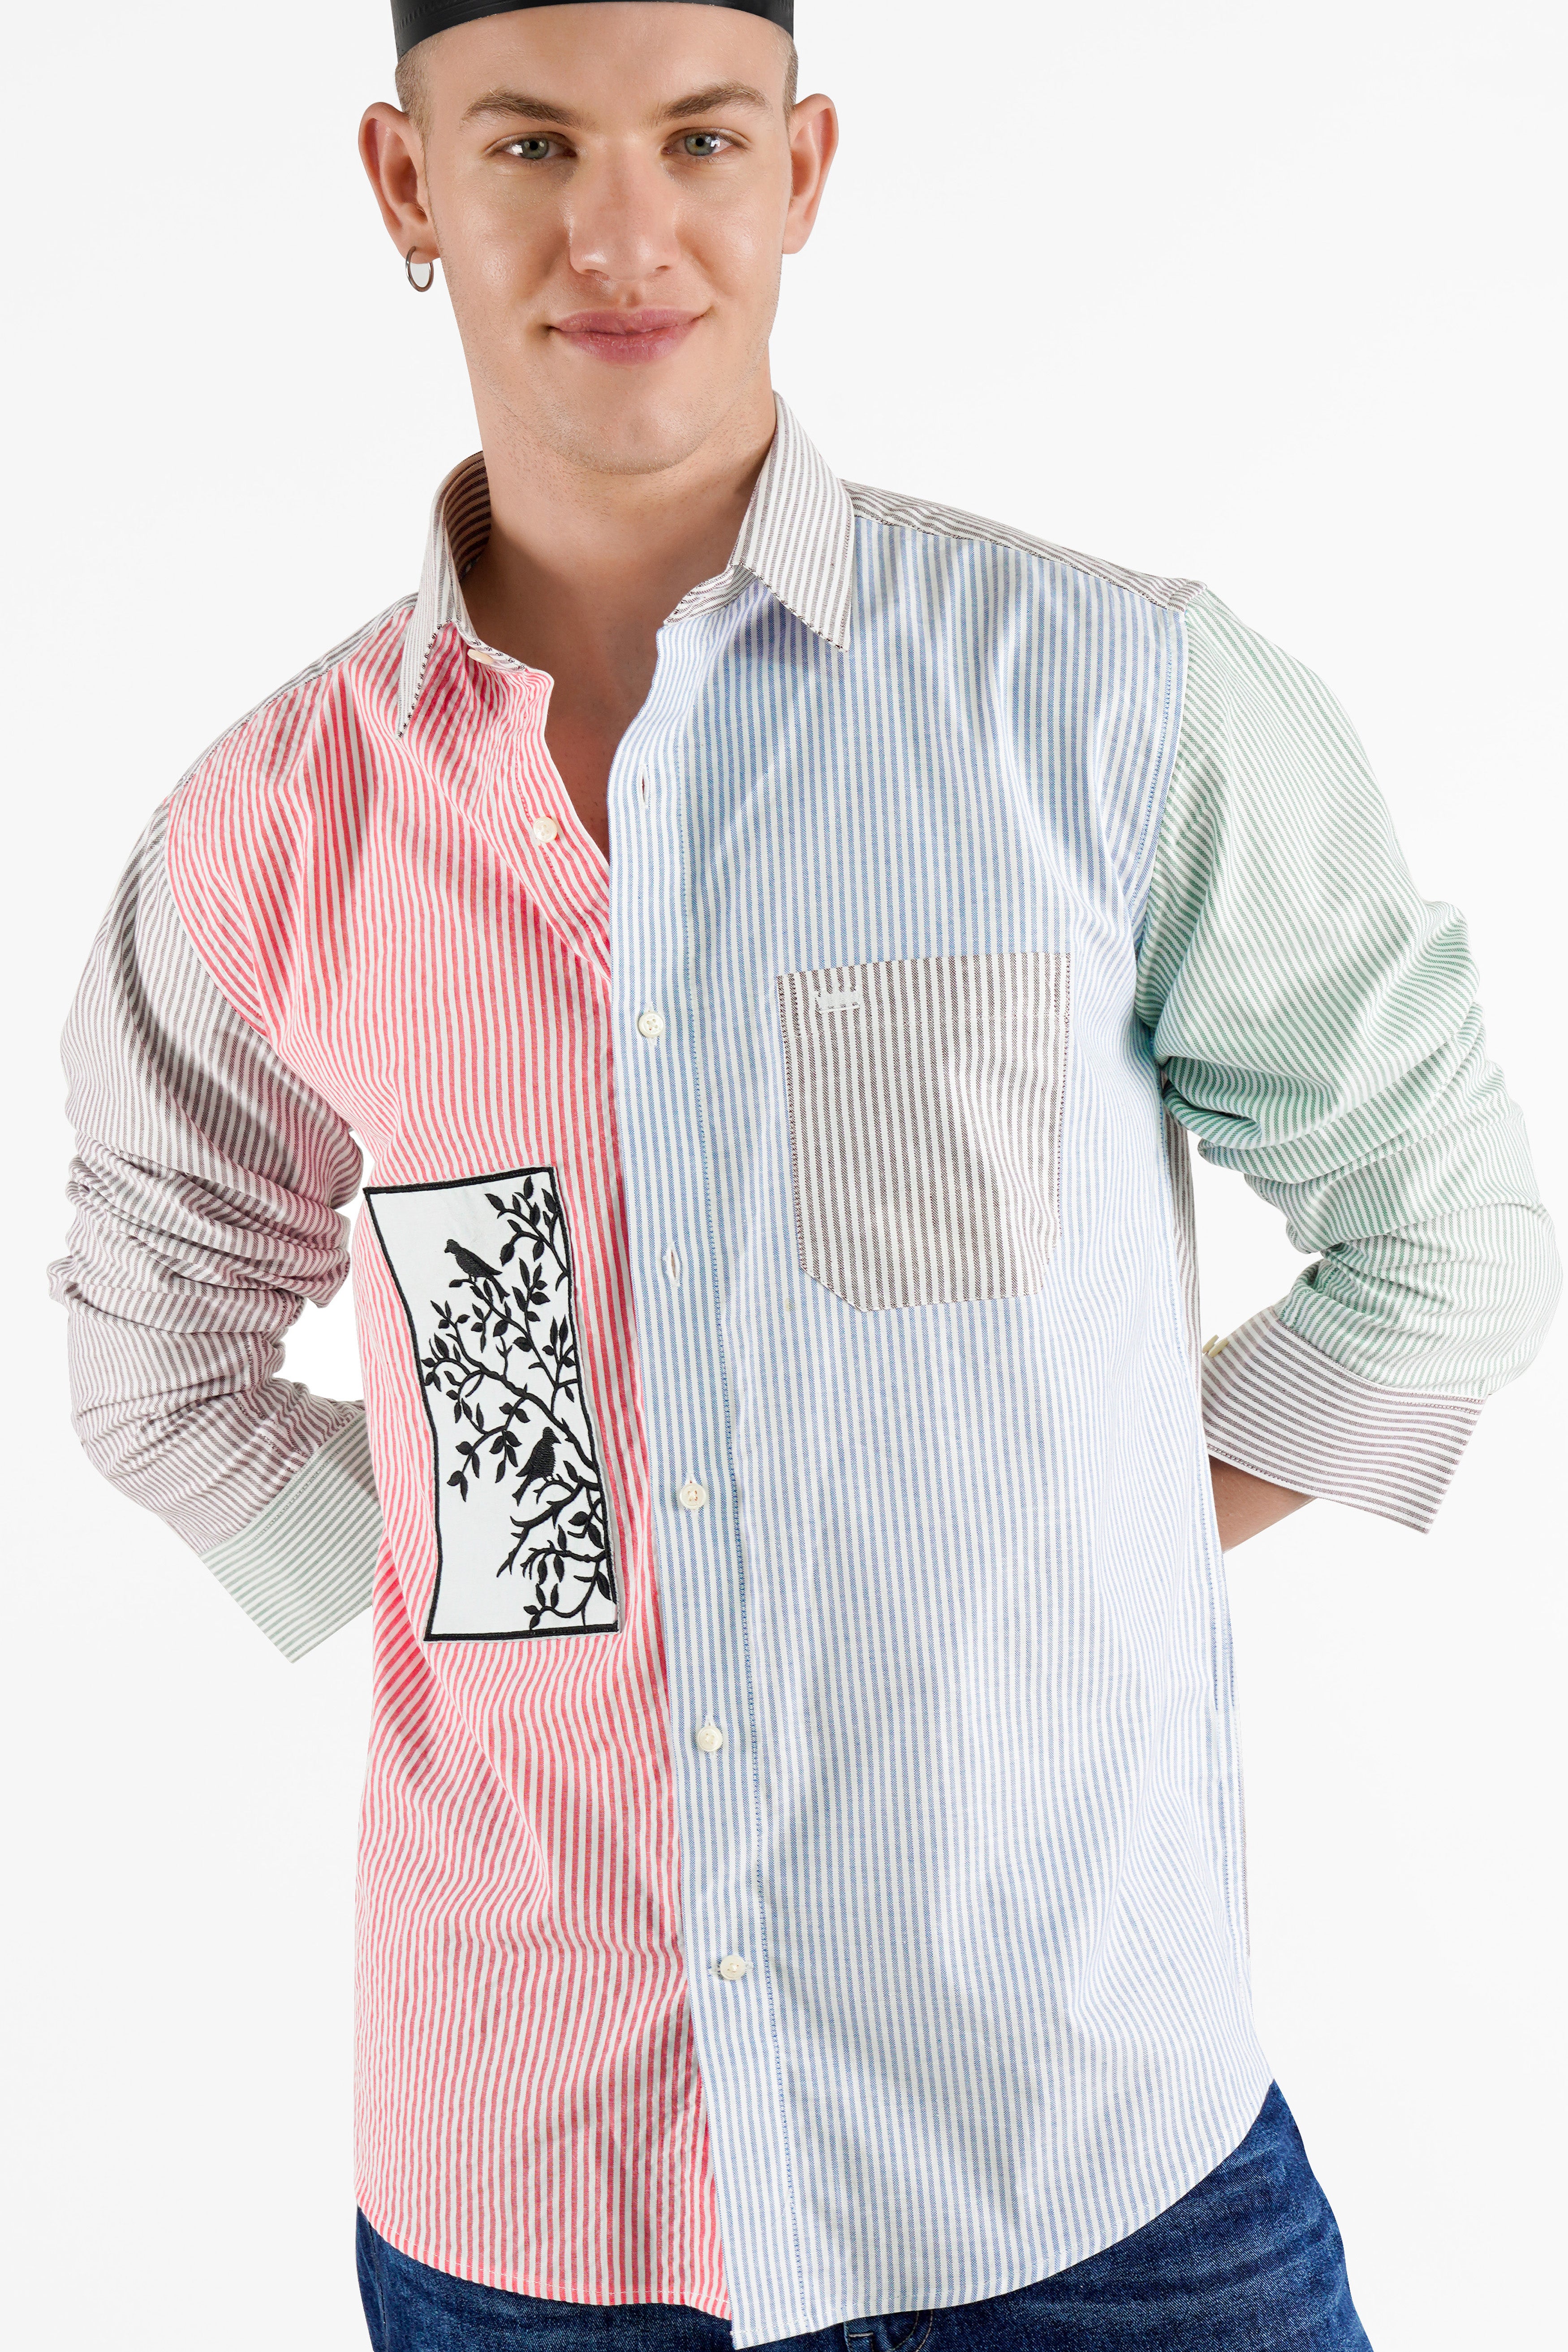 Blush Pink with Cerulean Blue Striped with Embroidered Patchwork Premium Cotton Designer Shirt